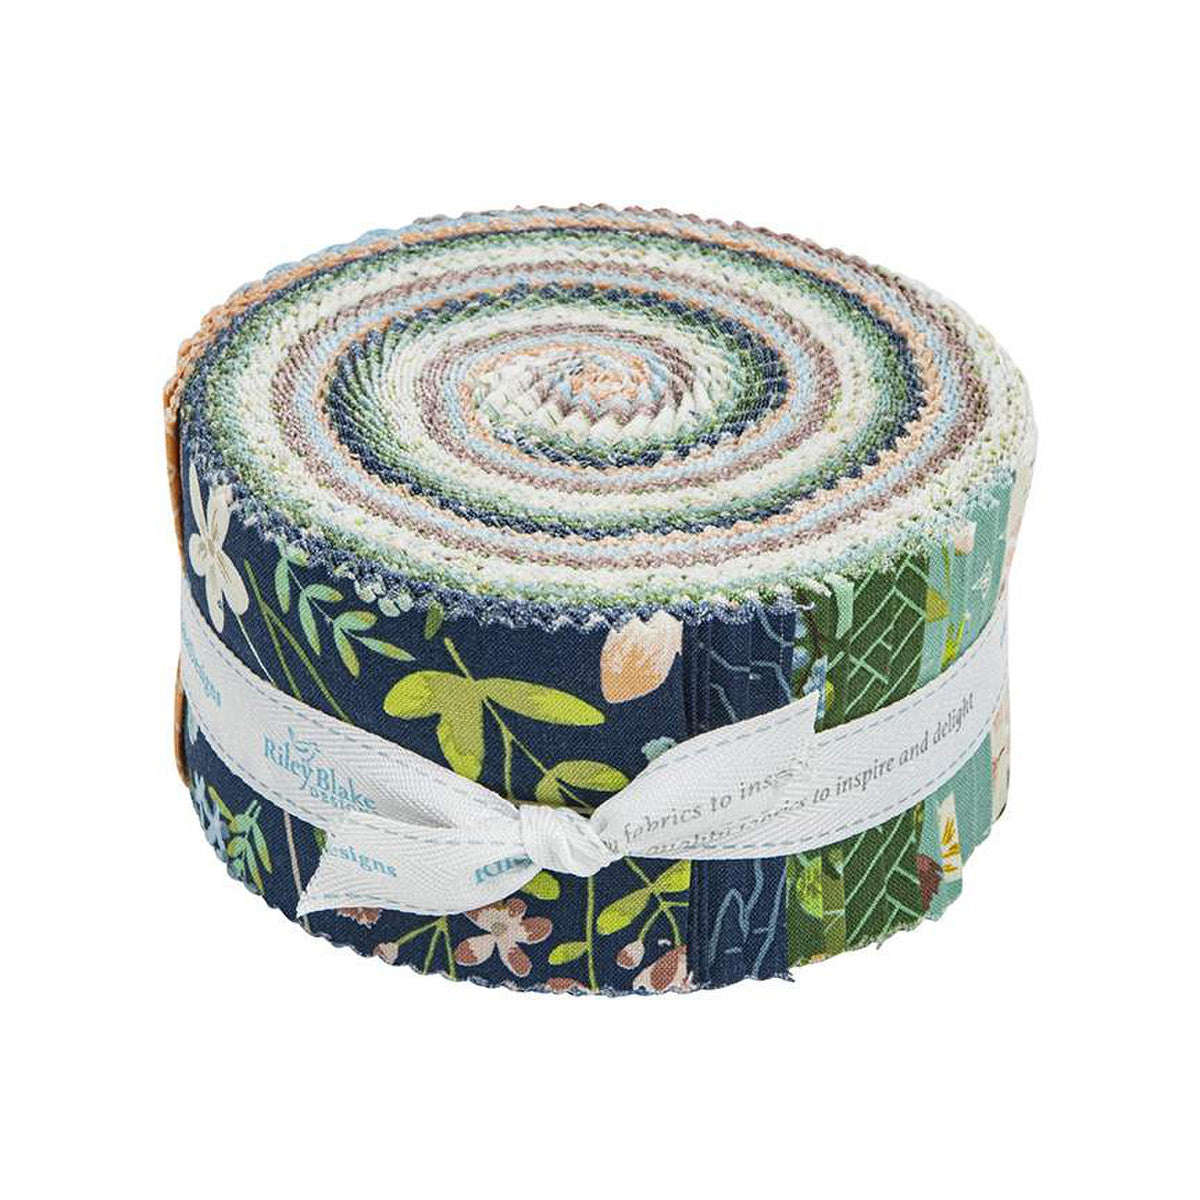 This 2 1/2" Rolie Polie precut bundle includes 40 pieces from the Wildwood Wander collection by Katherine Lenius for Riley Blake Designs. Each print will be included 1-2 times in the bundle.  100% cotton  Width: 2 1/2" Strips